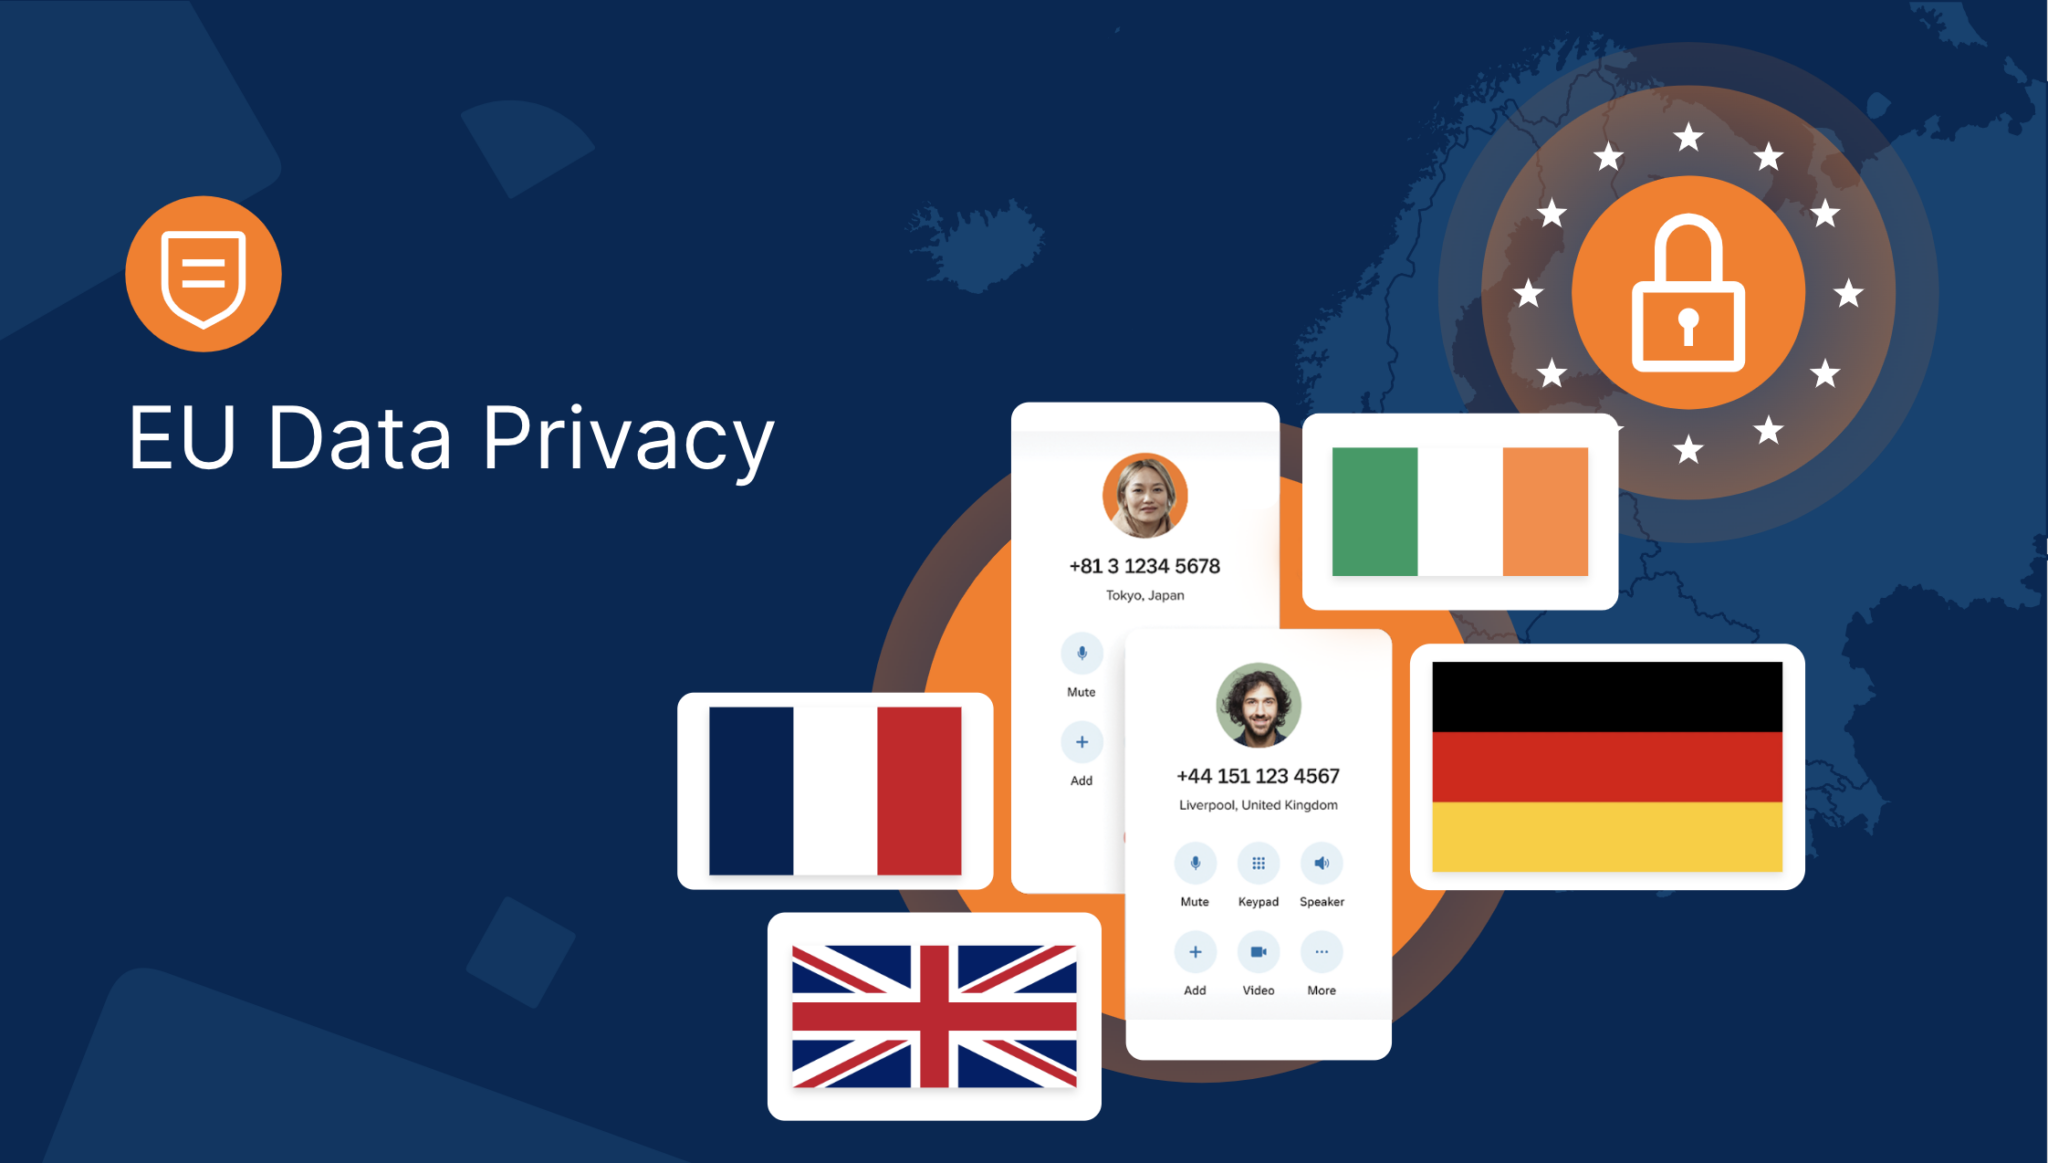 RingCentral app interface with France, Britain, German flags